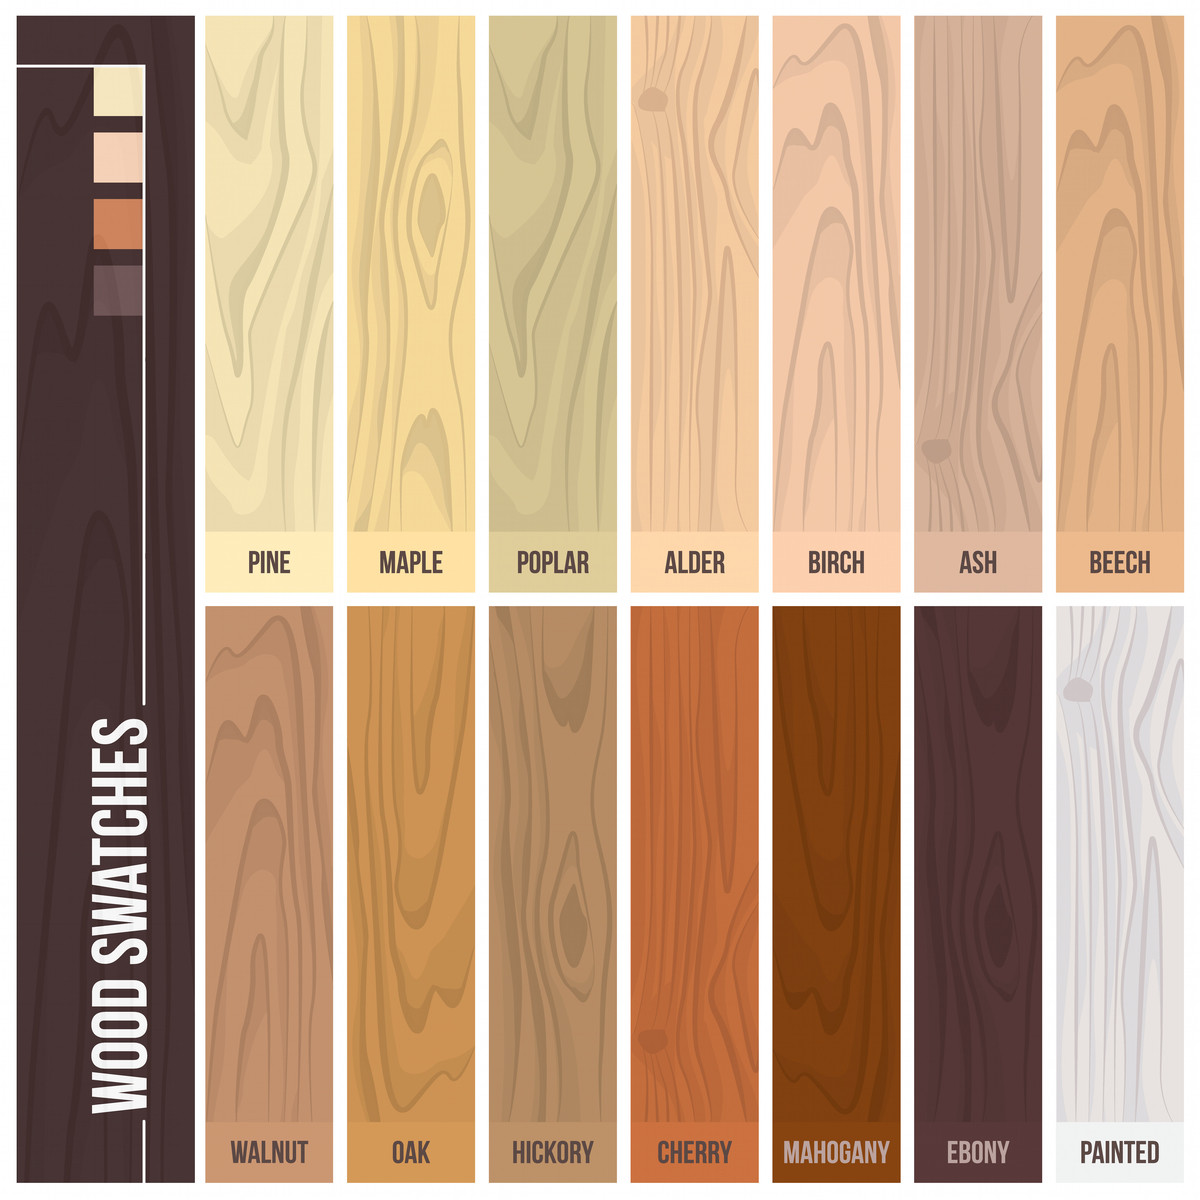 16 Lovely Price for Sanding and Refinishing Hardwood Floors 2022 free download price for sanding and refinishing hardwood floors of 12 types of hardwood flooring species styles edging dimensions with types of hardwood flooring illustrated guide